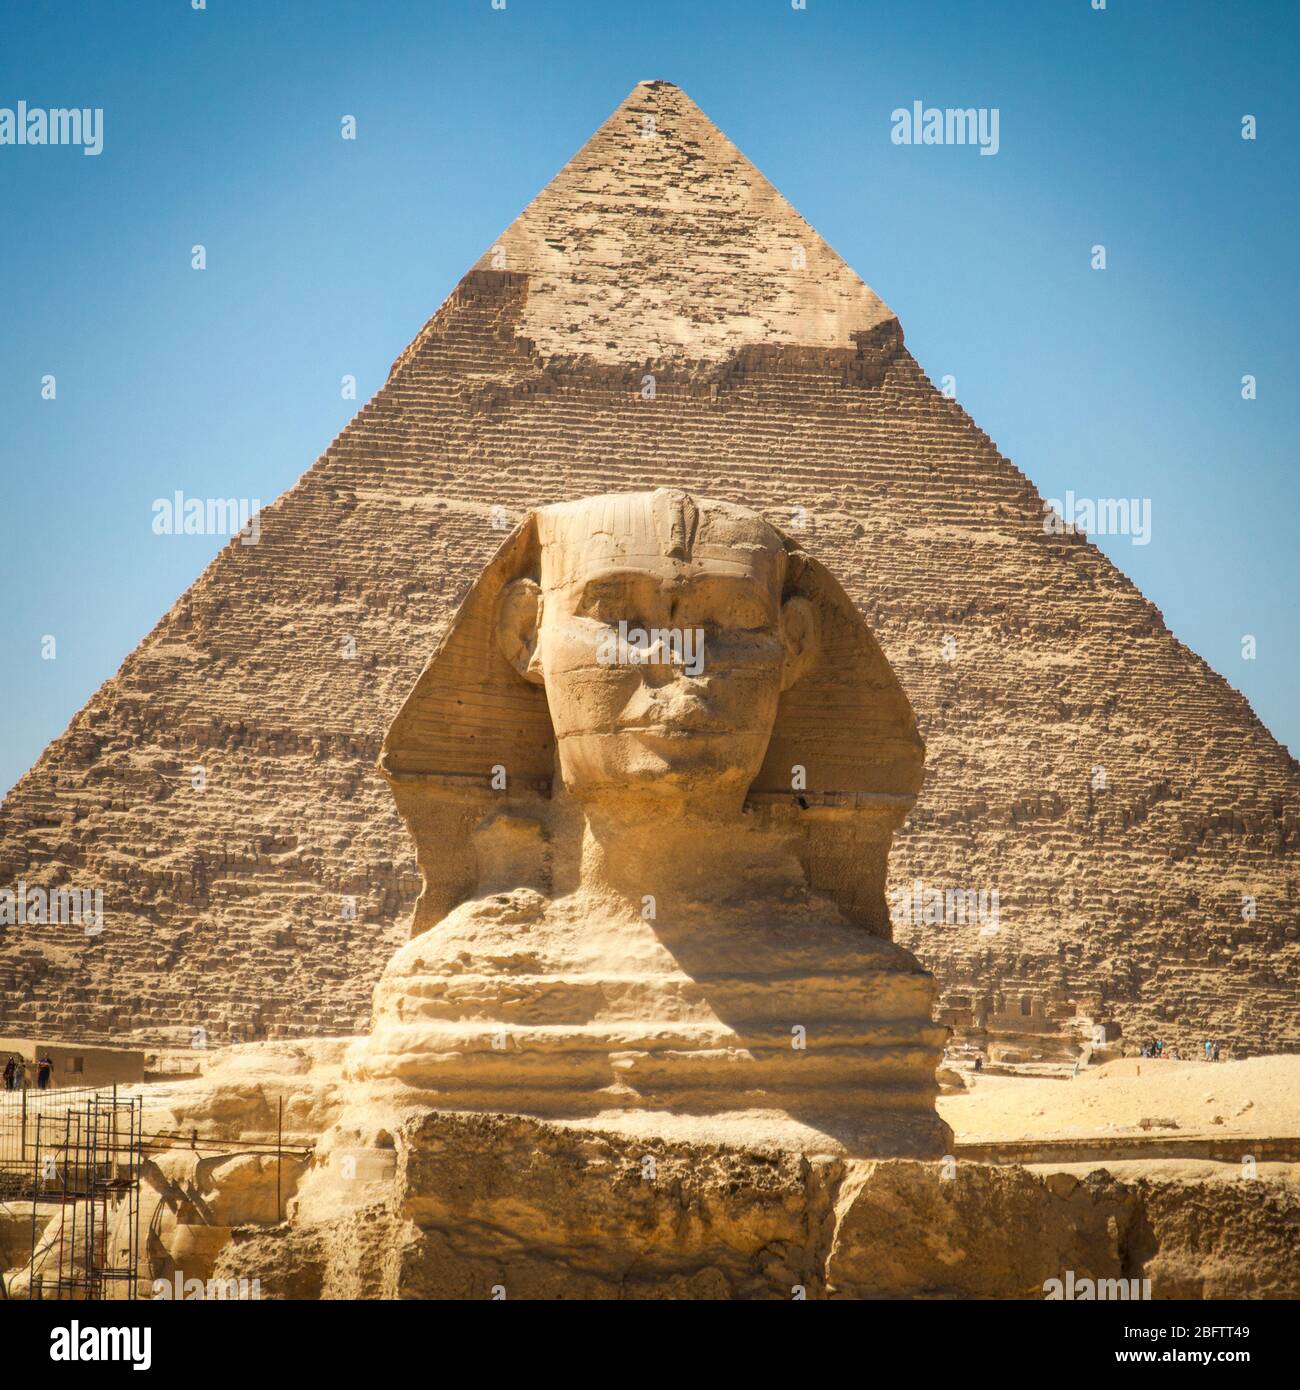 The Great Sphinx in Front of The Pyramid of Khafre Stock Photo